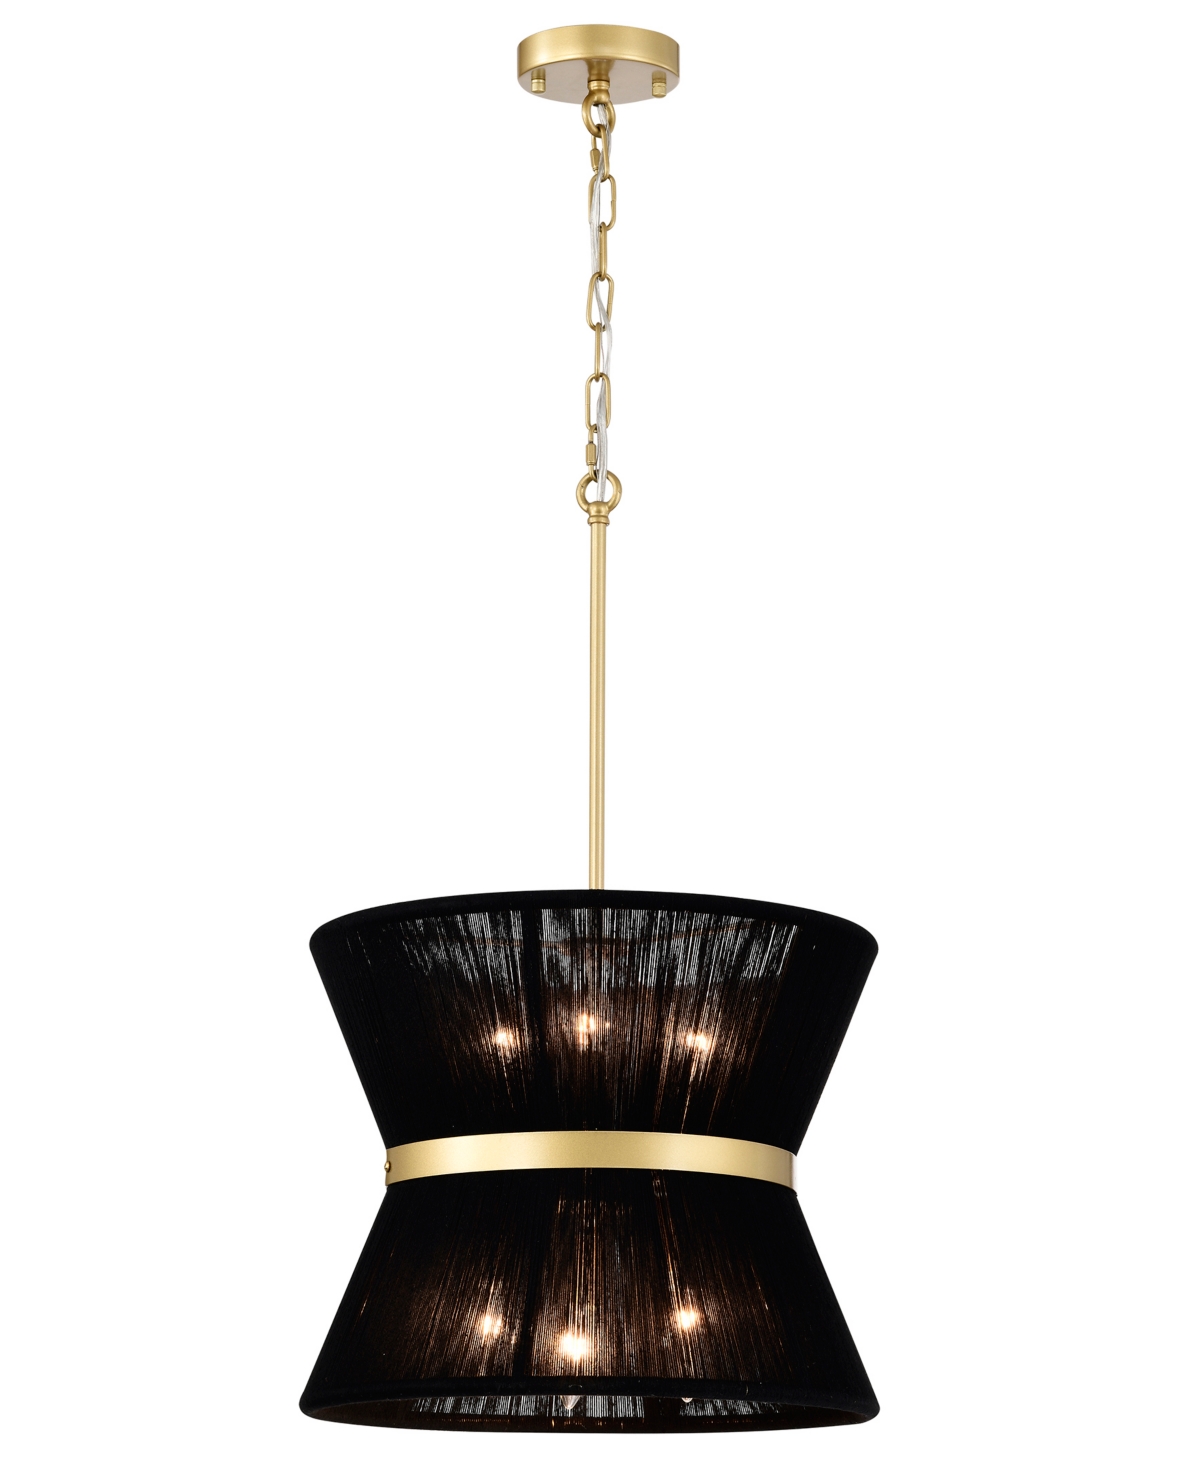 Home Accessories Abra 16" 6-light Indoor Finish Chandelier With Light Kit In Brass And Black Thread